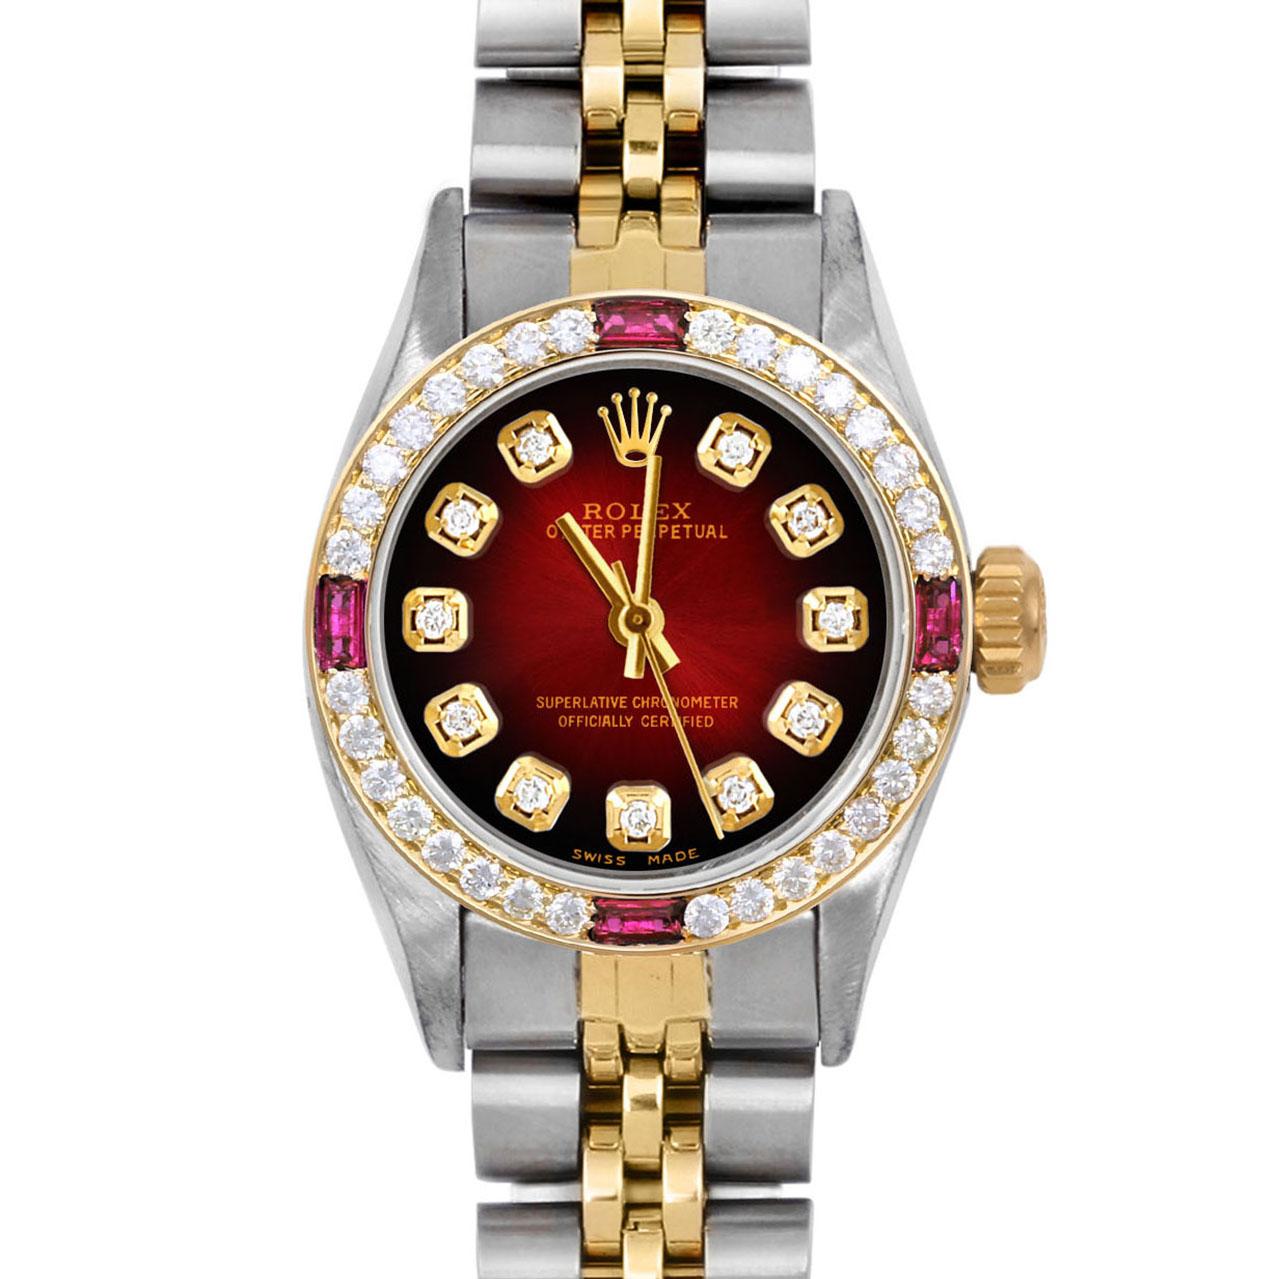 Brand : Rolex
Model : Oyster Perpetual 
Gender : Ladies
Metals : 14K Yellow Gold / Stainless Steel
Case Size : 24 mm
Dial : Custom Red Vignette Diamond Dial (This dial is not original Rolex And has been added aftermarket yet is a beautiful Custom